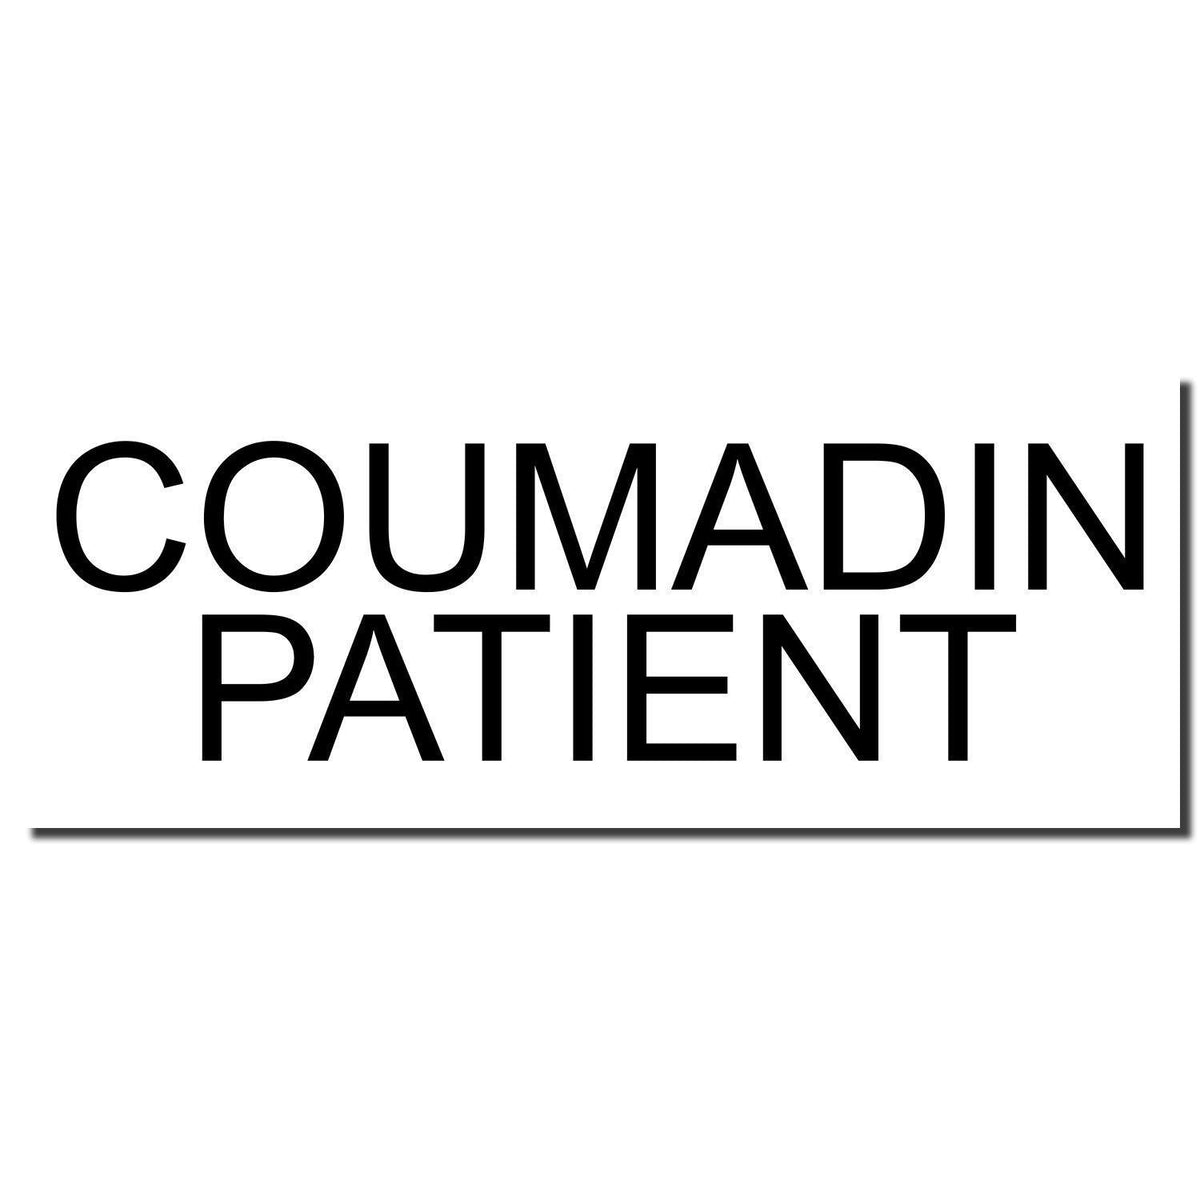 Enlarged Imprint Coumadin Patient Rubber Stamp Sample